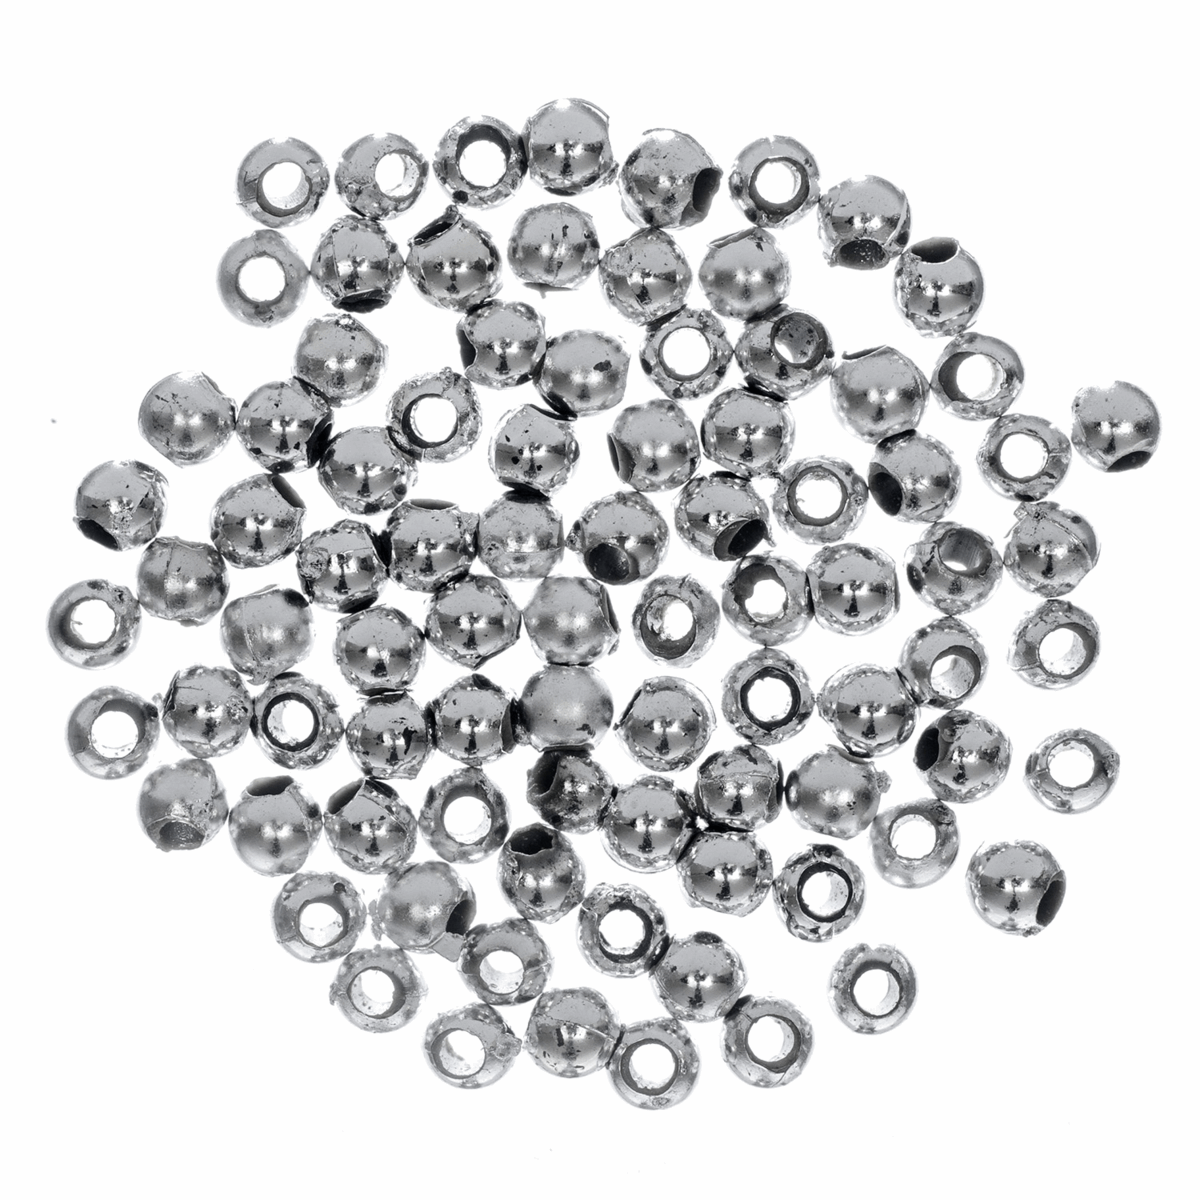 Trimits Plated Beads - Silver